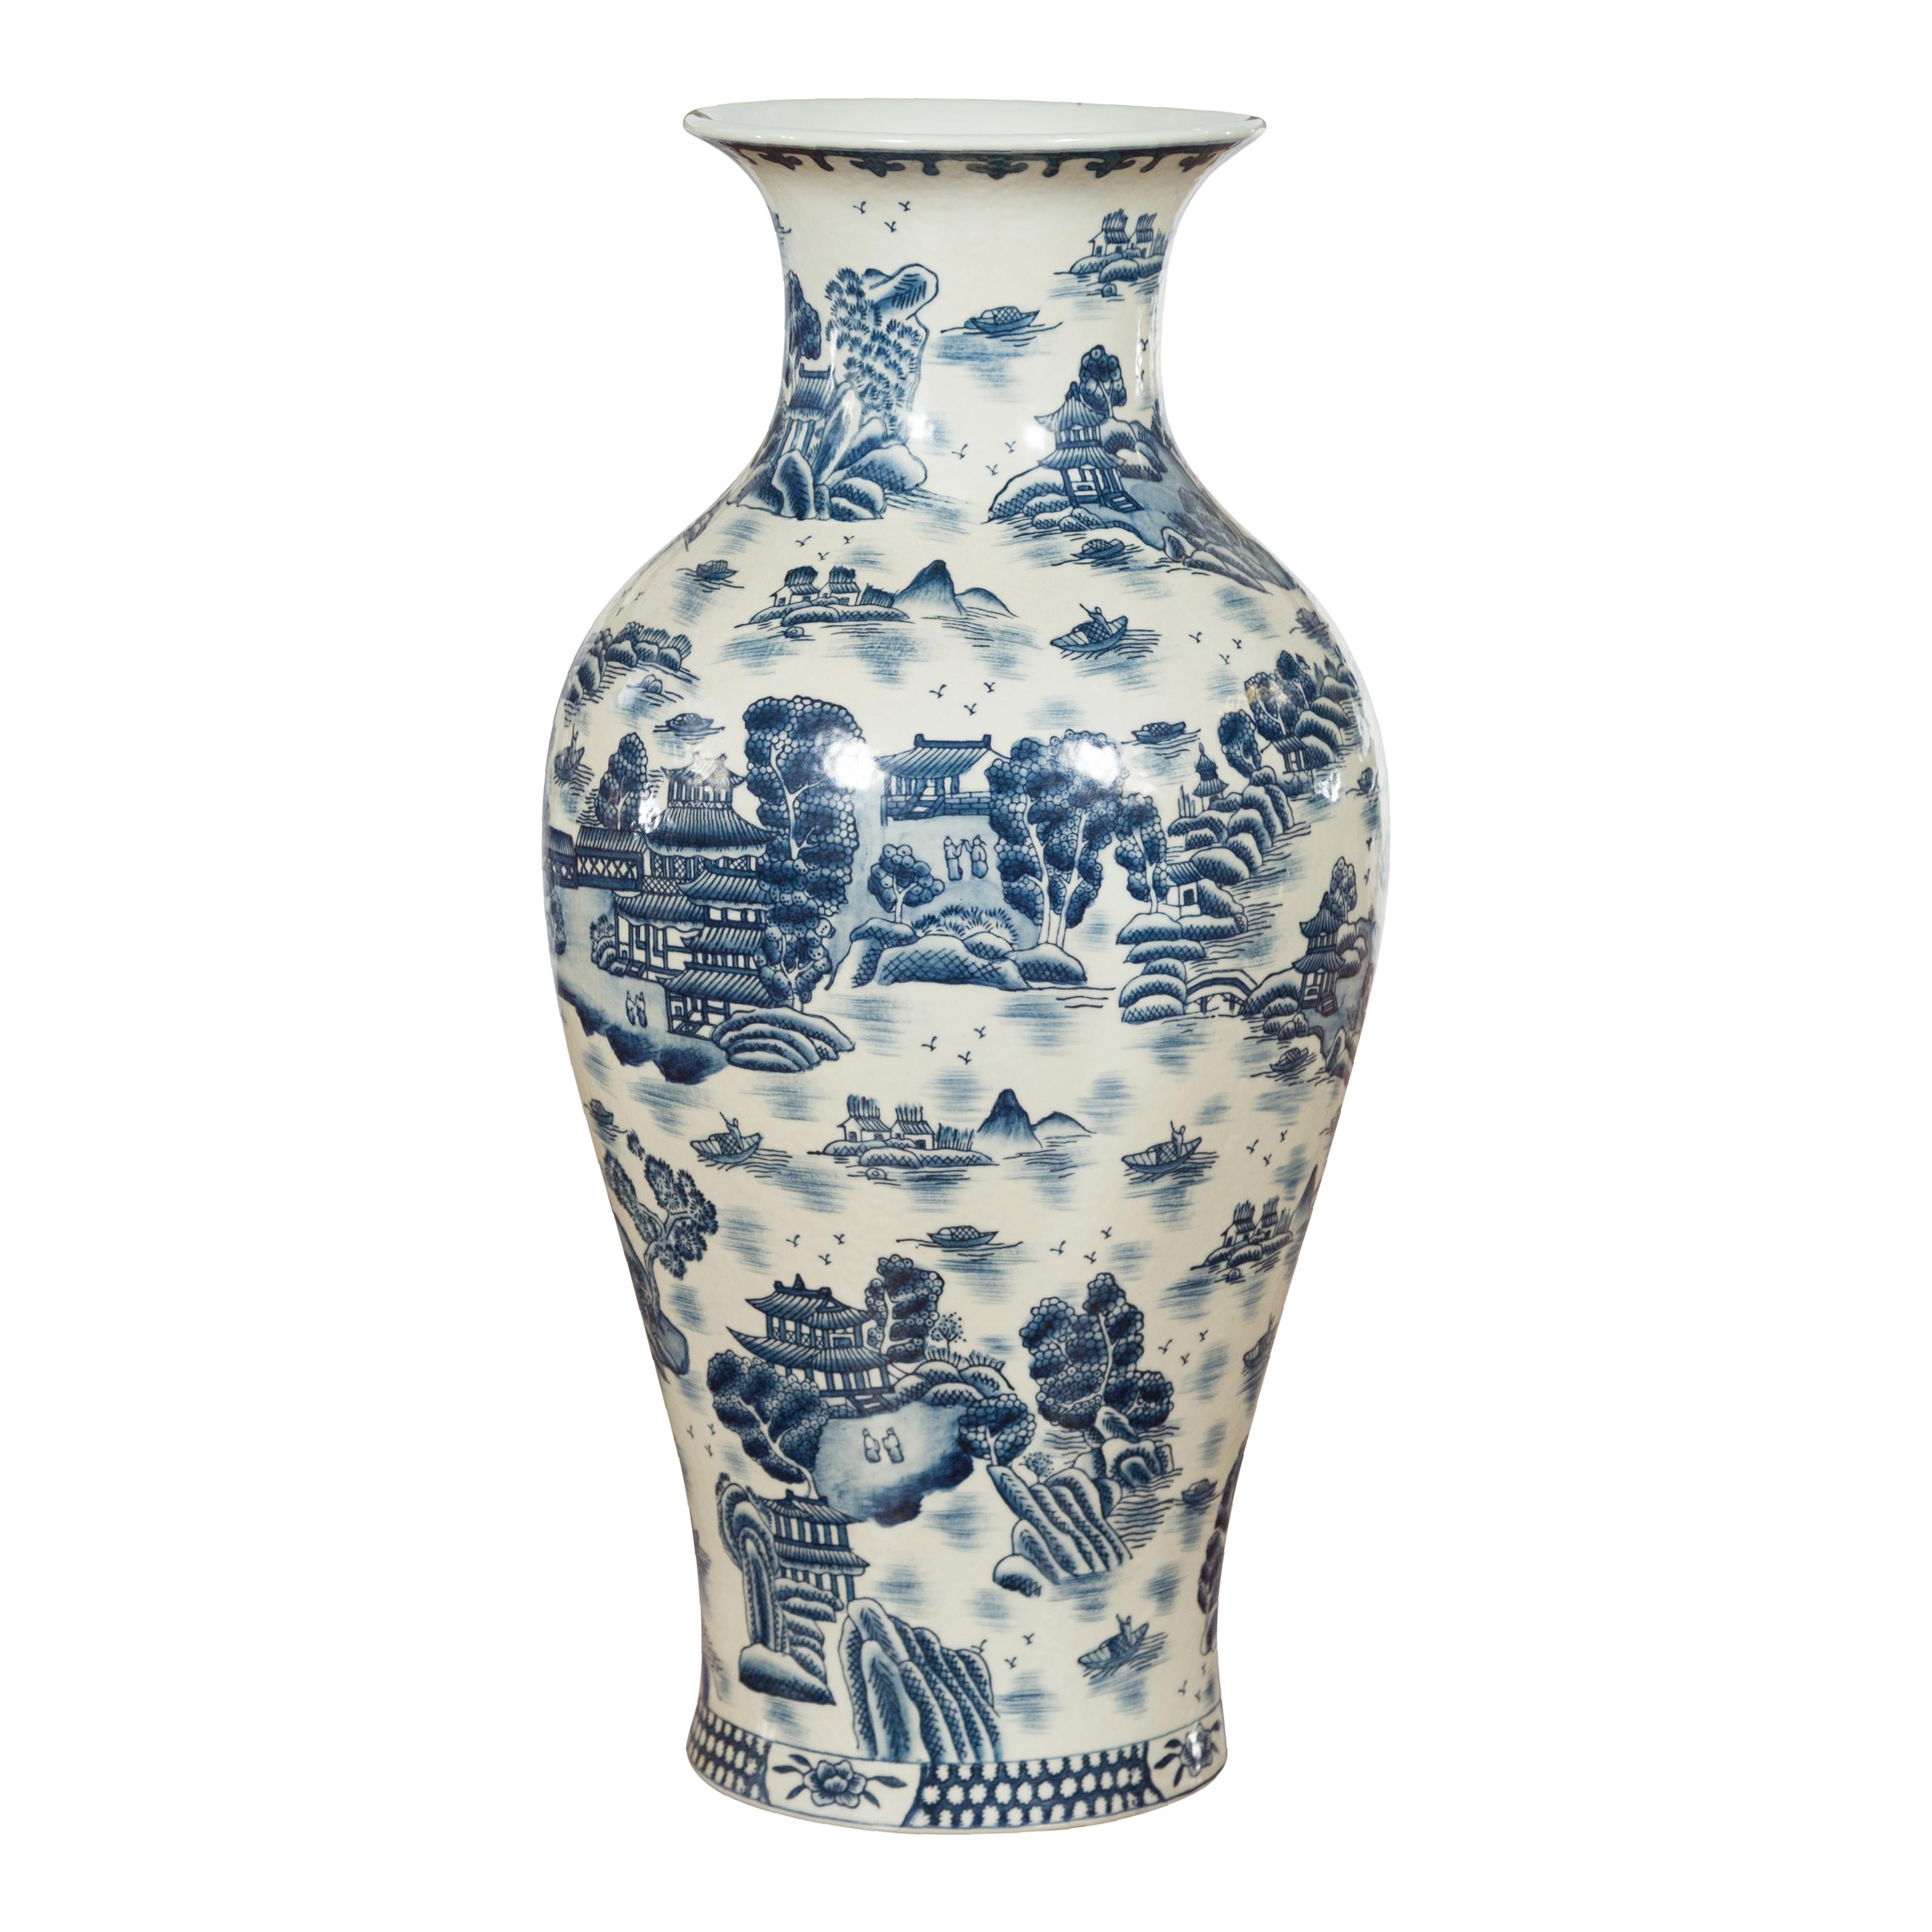 A vintage Chinese blue and white hand-painted vase from the mid-20th century, with architecture, tree and water décor. Created in China during the Midcentury period, this porcelain vase features a nicely curving silhouette topped with a narrow neck